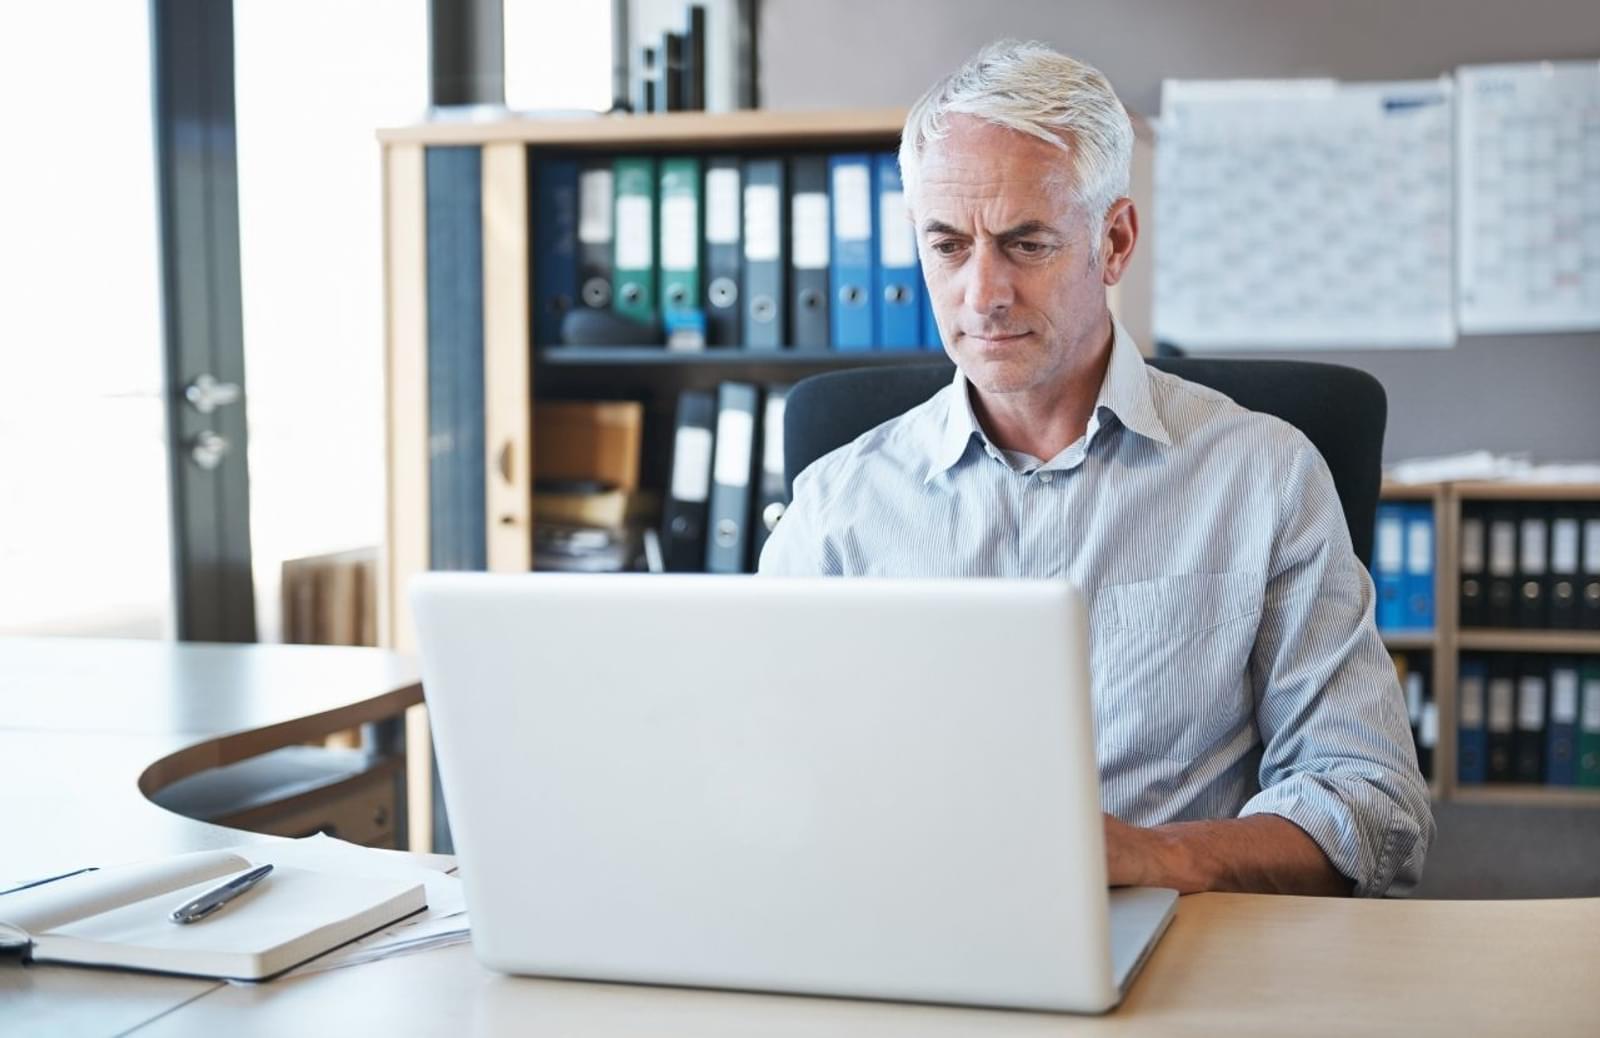 Gray-haired man sitting at desk working on a laptop computer